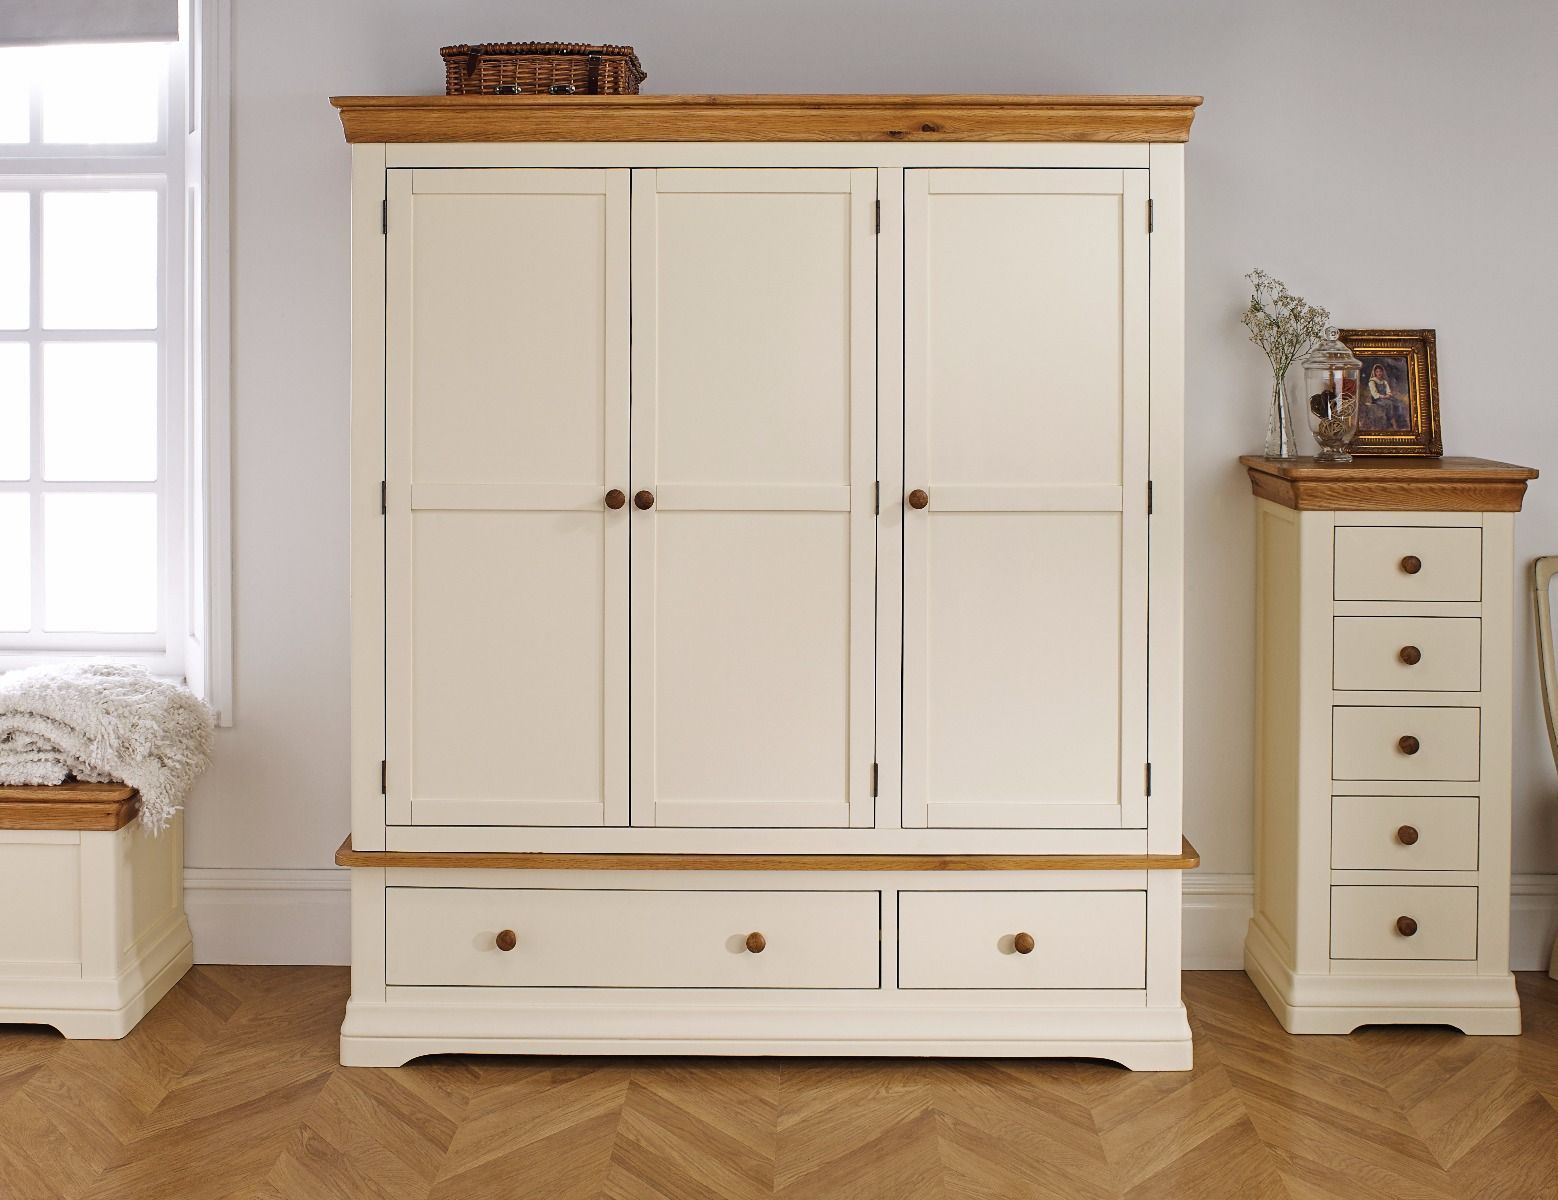 Farmhouse Cream Painted Triple Oak Wardrobe – Free Delivery | Top Furniture Throughout Cream Triple Wardrobes (View 2 of 15)